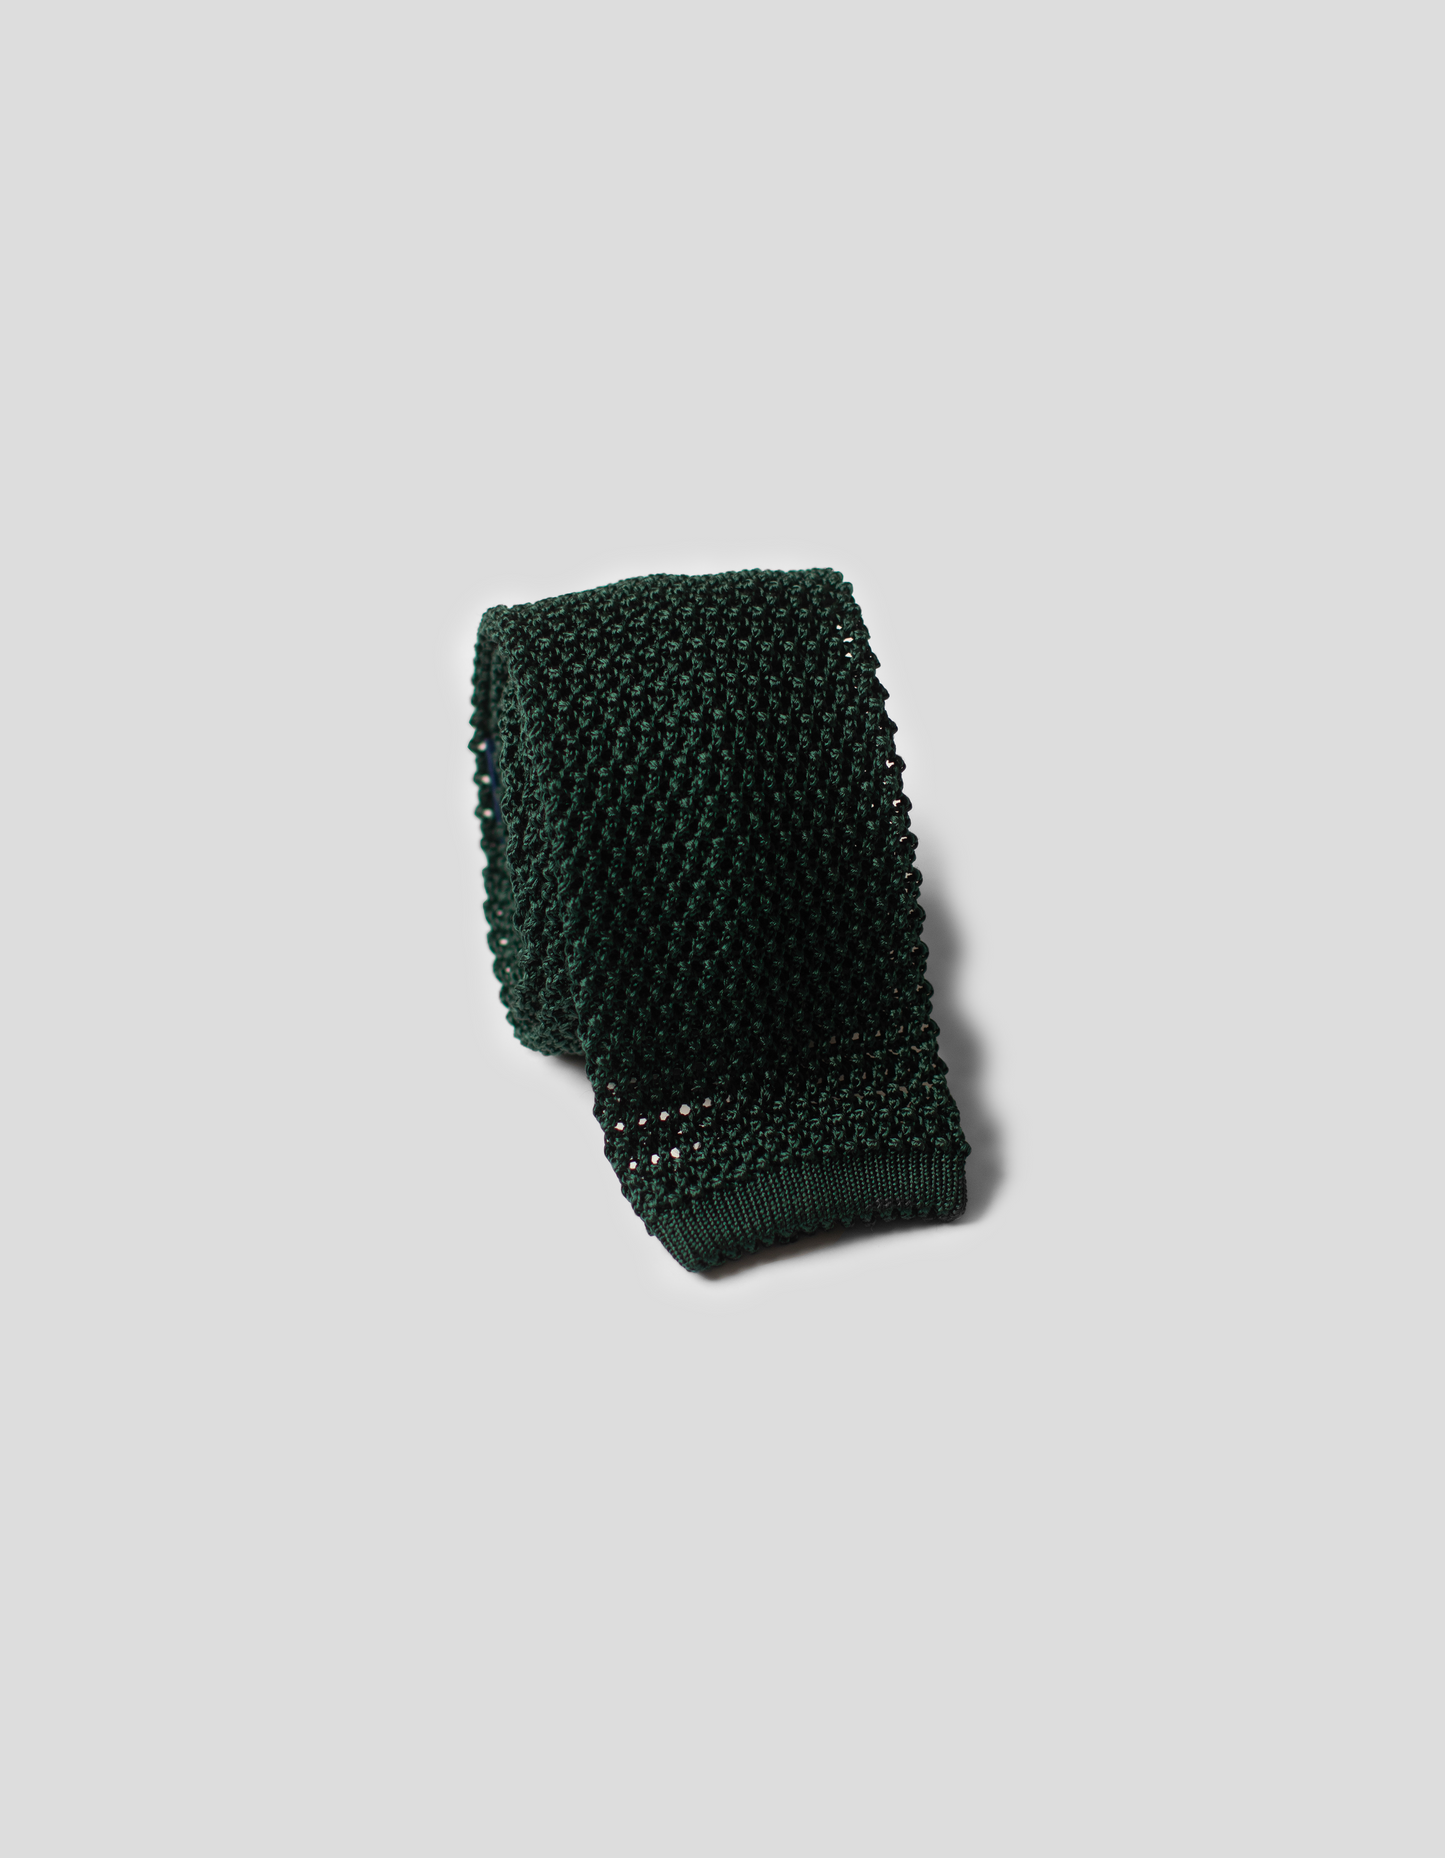 SOLID KNIT TIE - GREEN